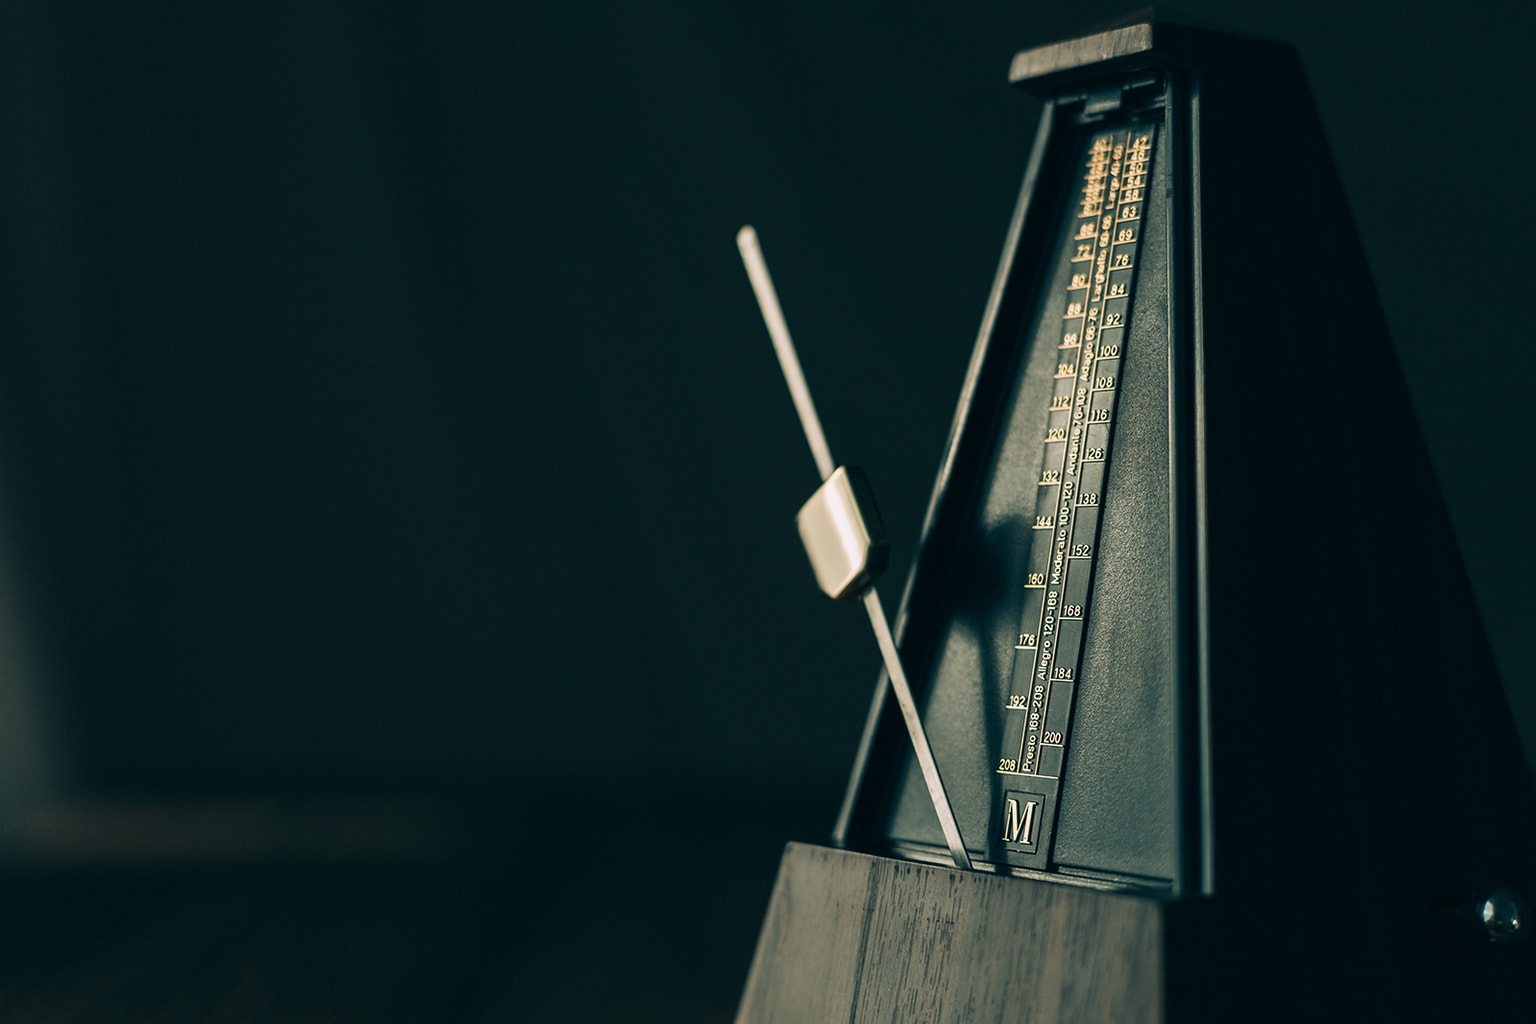 the principle of rhythm displayed with a metronome